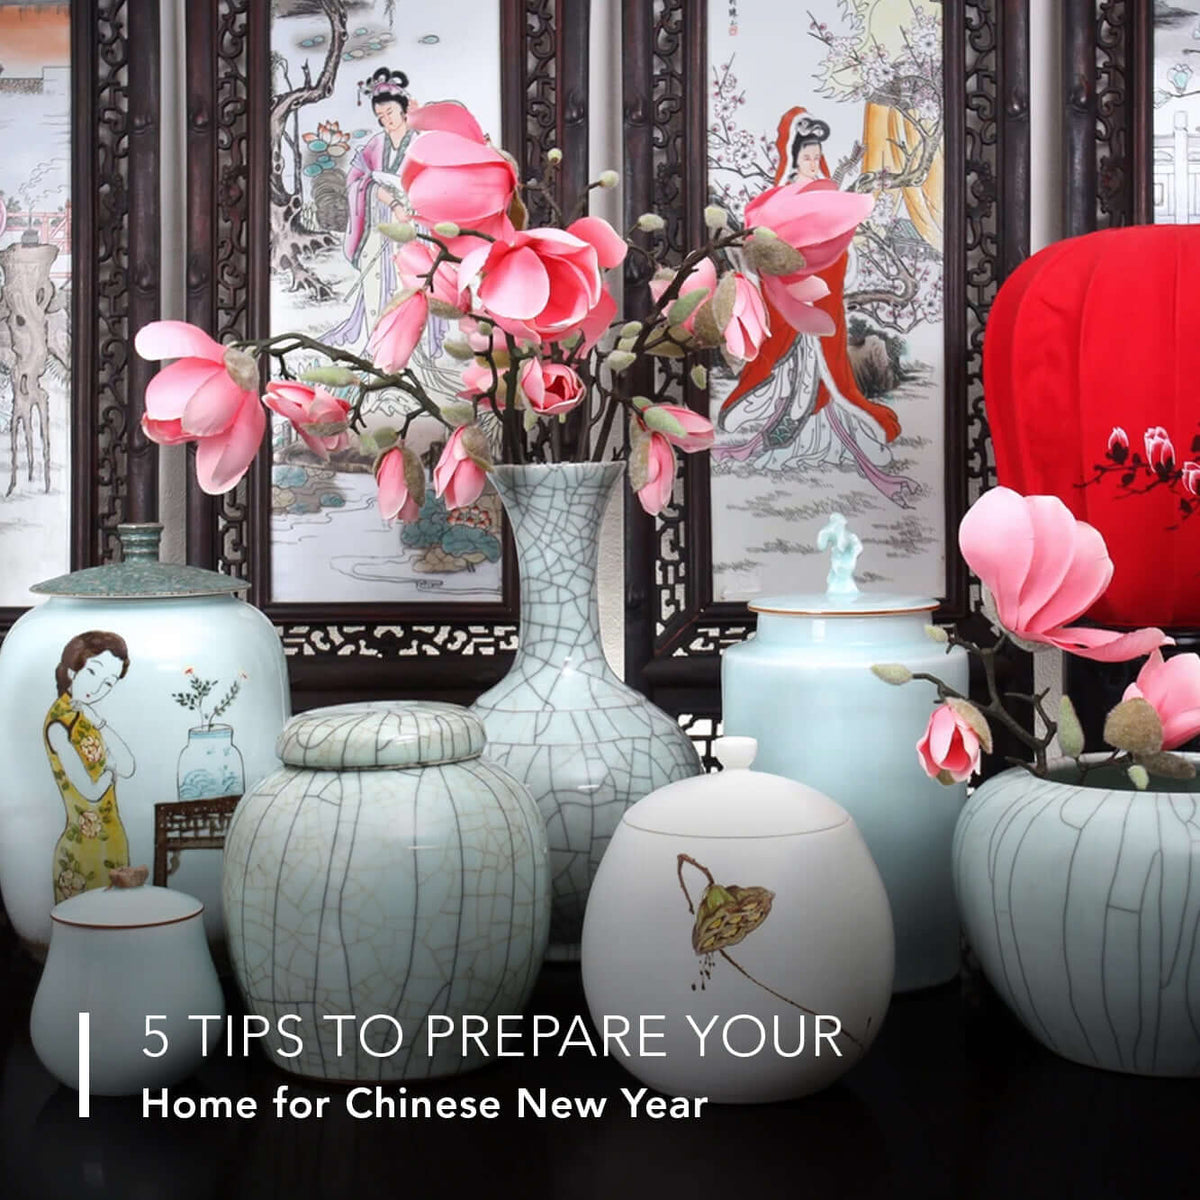 How to Prepare Your Home for Lunar New Year - THE JOEY JOURNAL